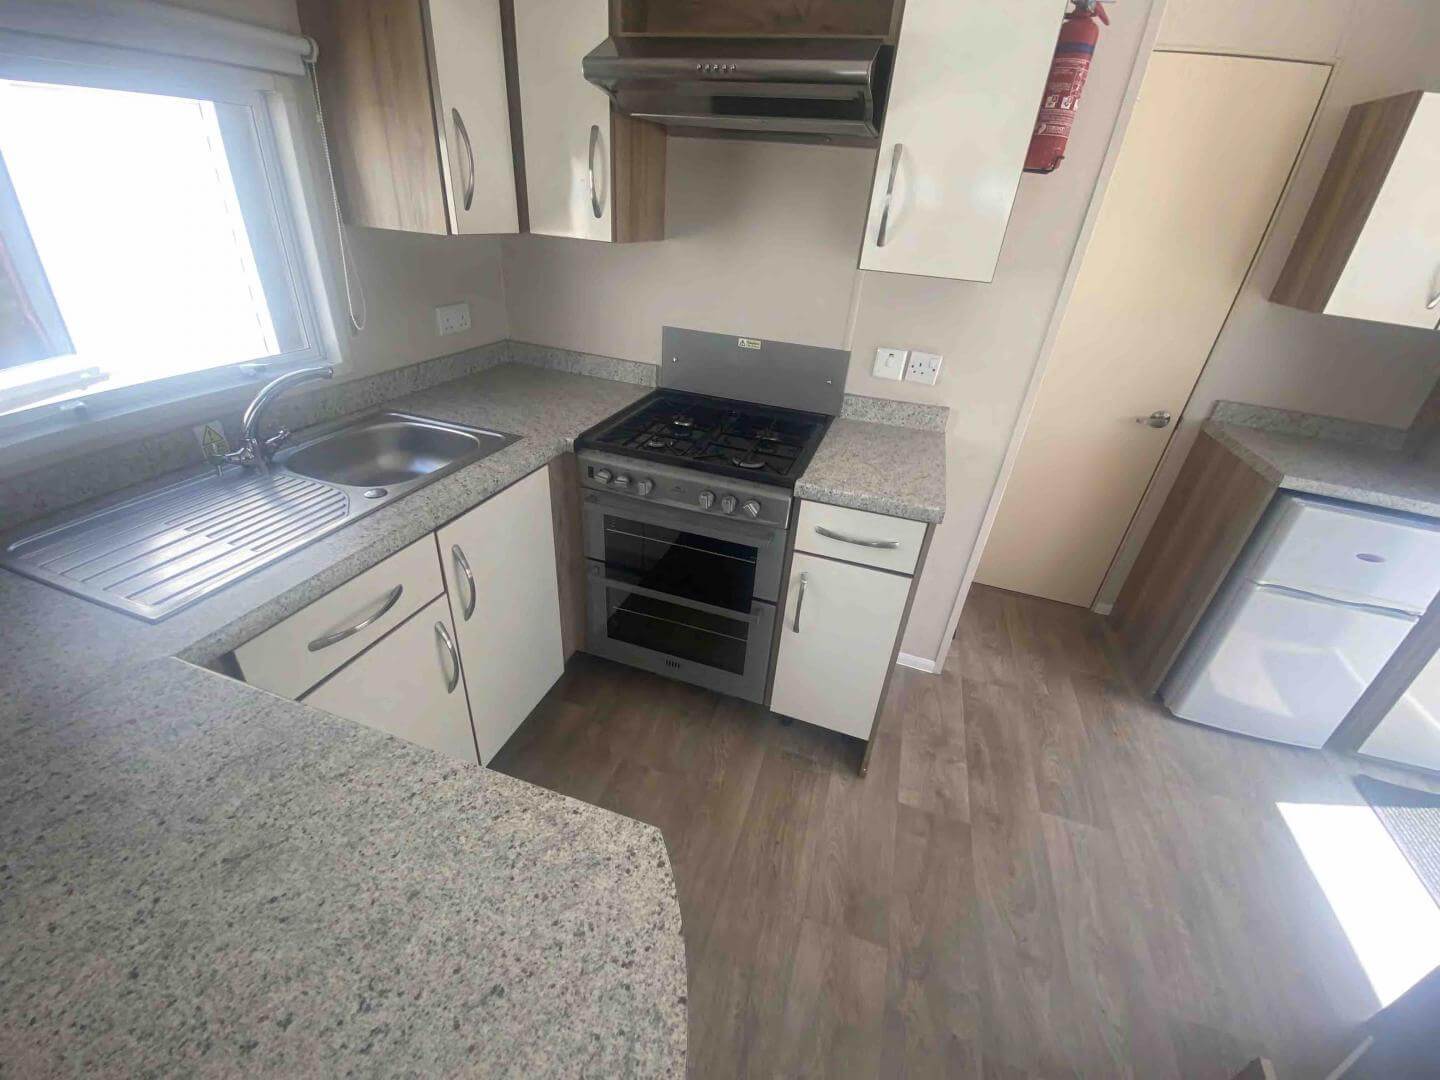 Mobil-home - Willerby 32